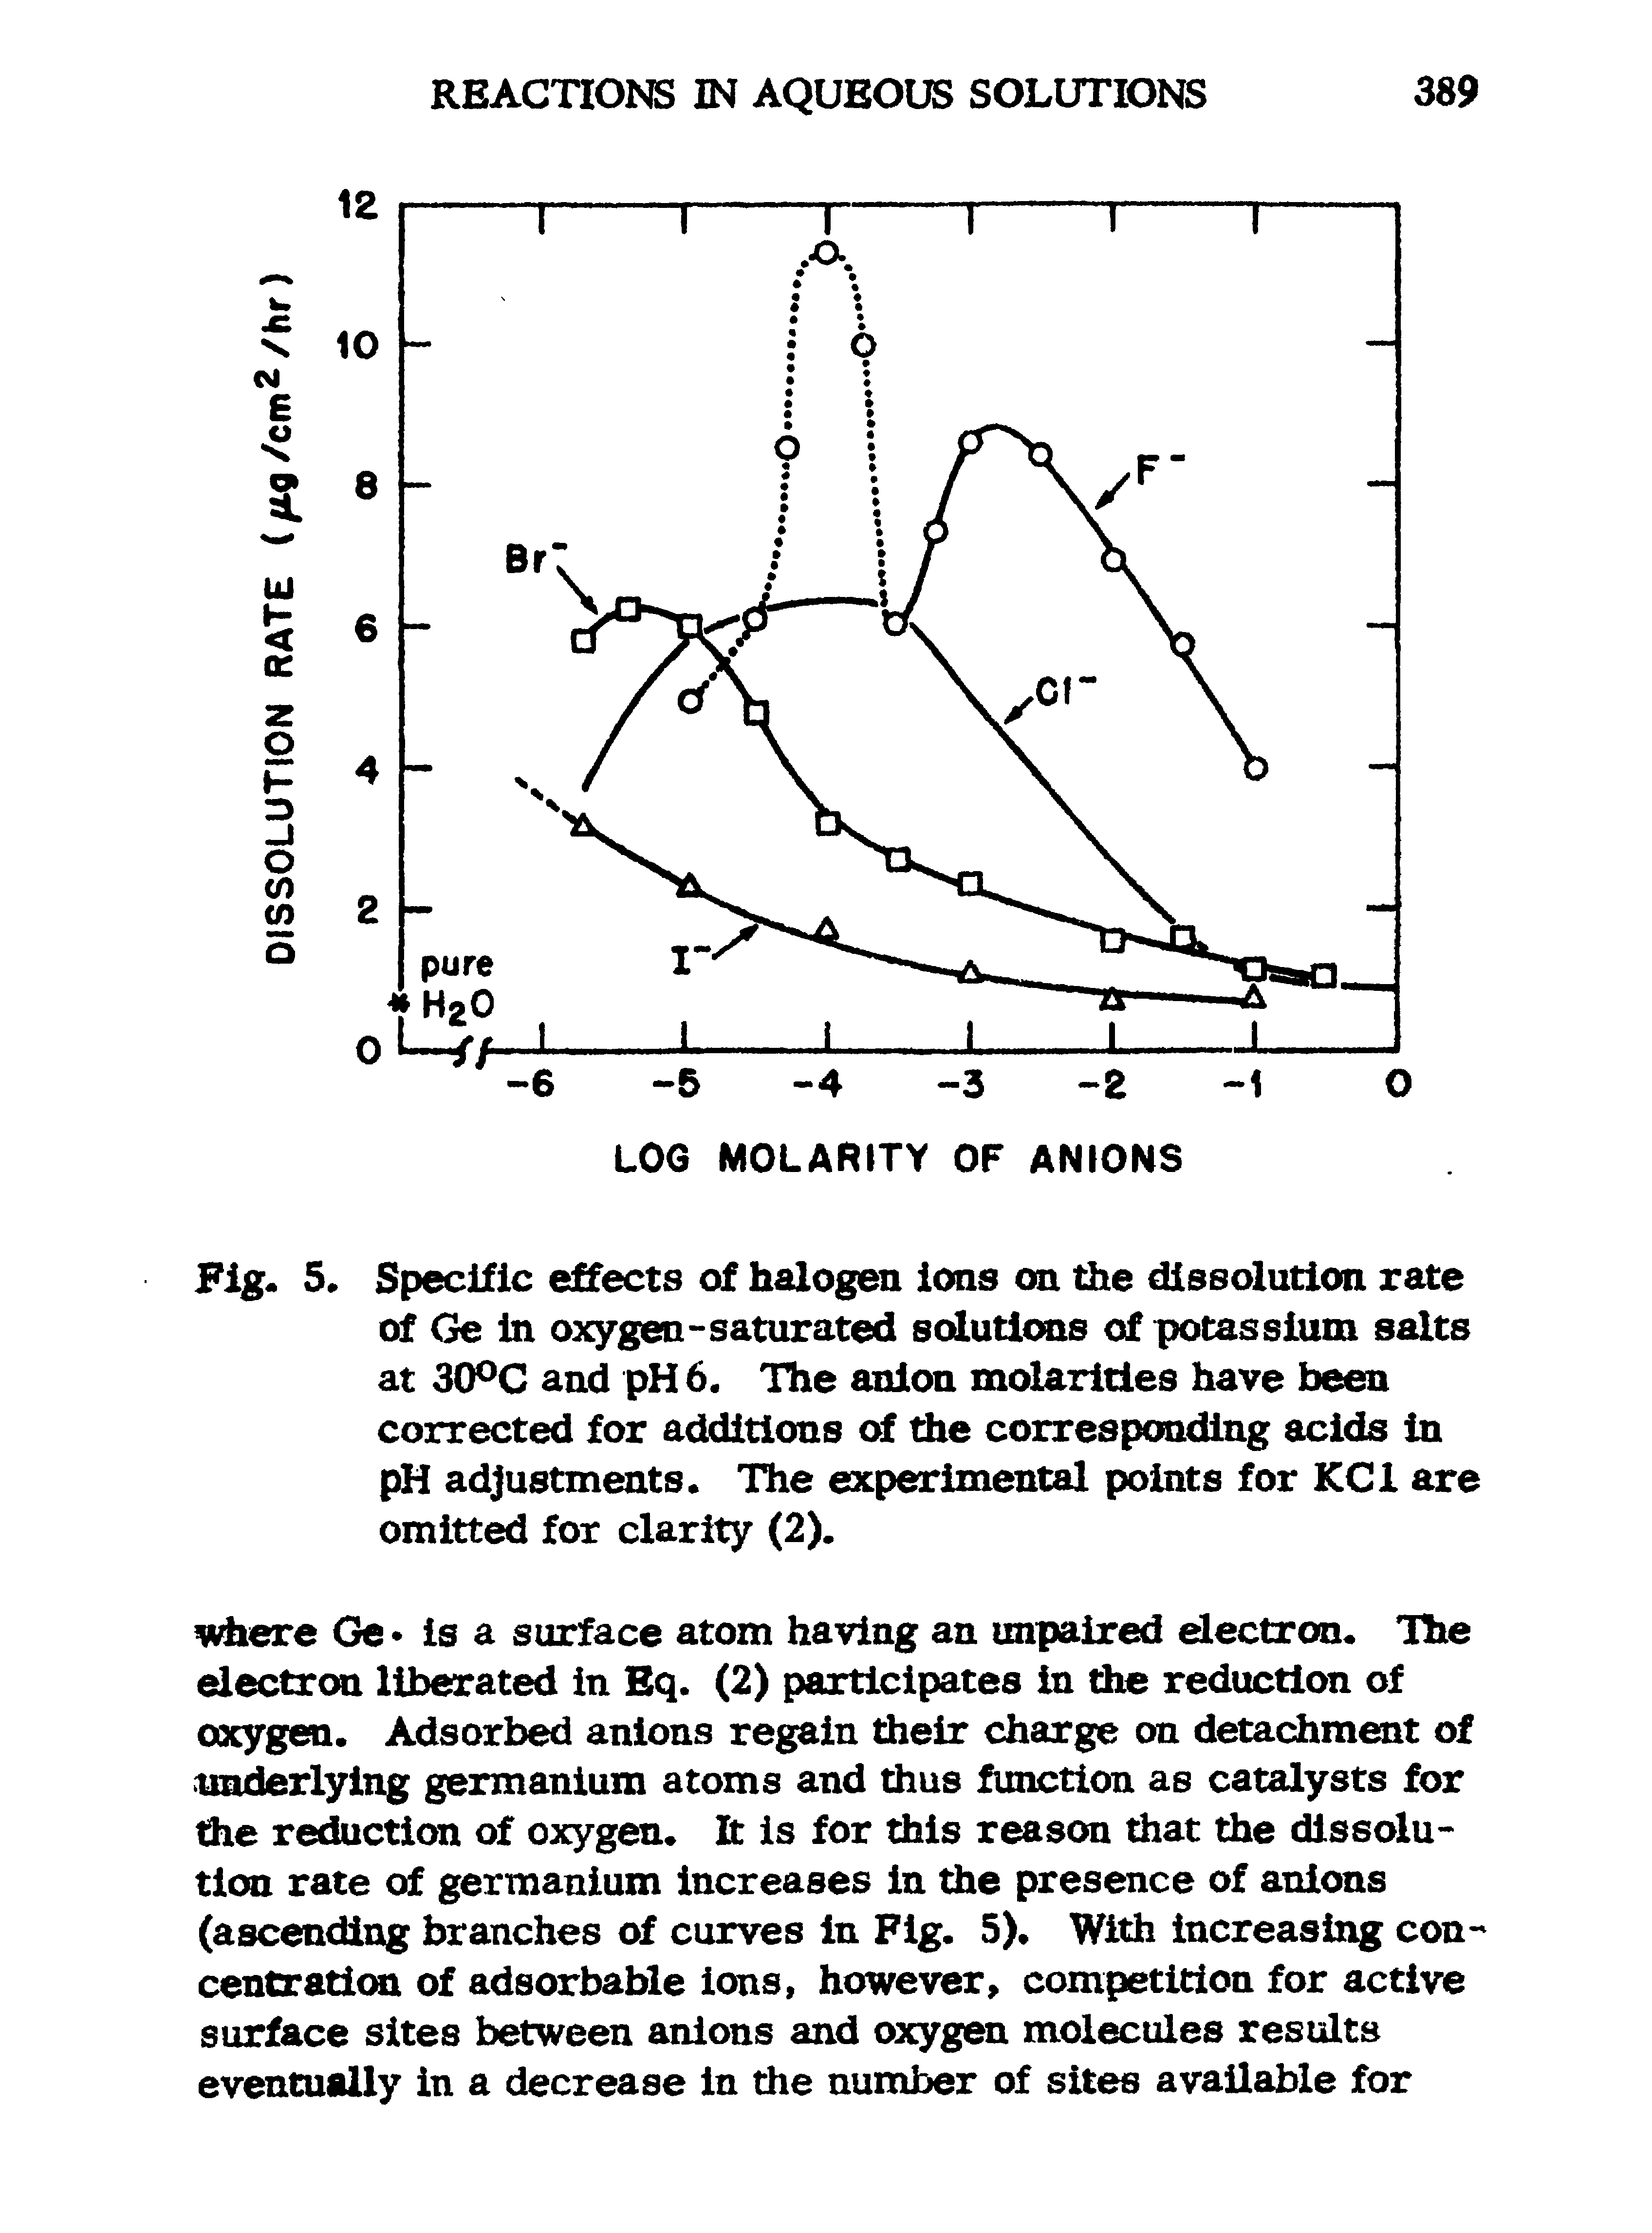 Fig. 5. Specific effects of halogen ions on the dissolution rate of Ge in oxygen-saturated solutions of potassium salts at 30°C and pH 6. The anion molarities have been corrected for additions of die corresponding acids in pH adjustments. The experimental points for KC1 are omitted for clarity (2).